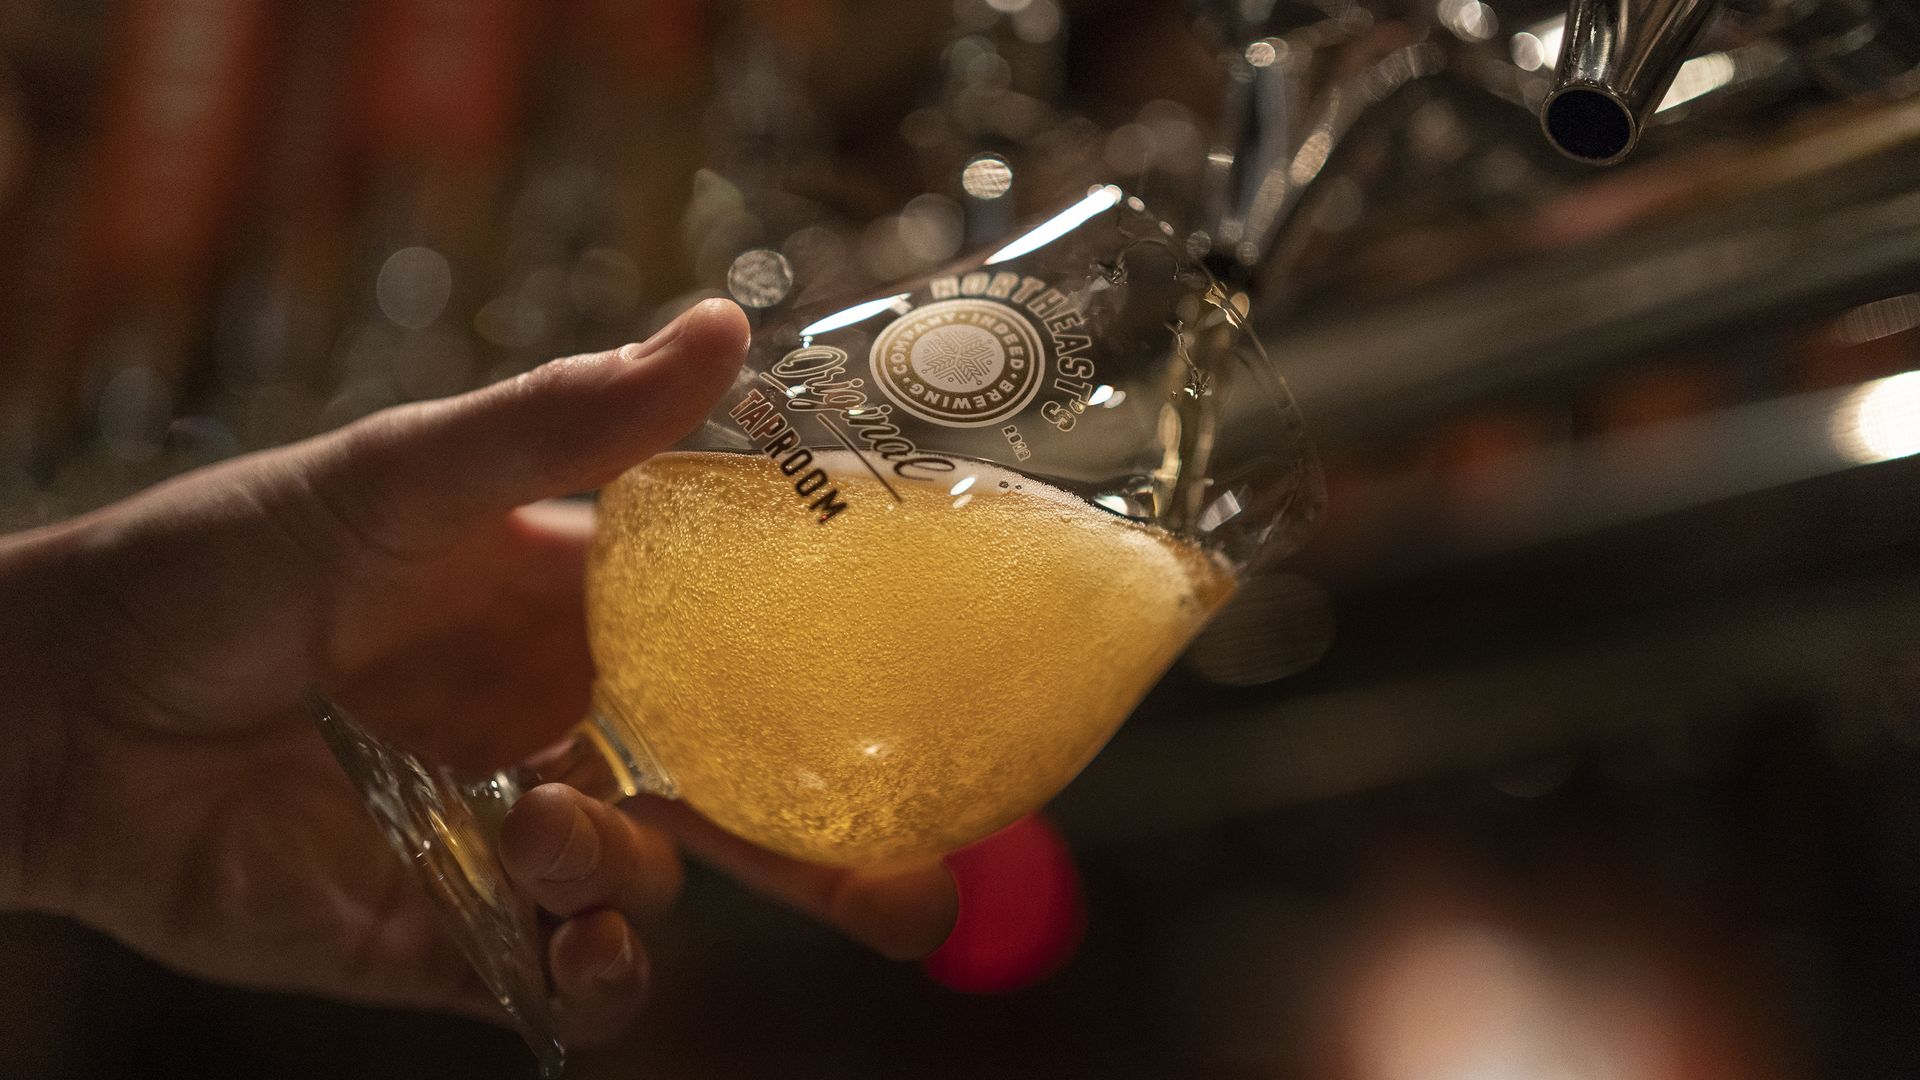 A person pours beer into a glass cup.